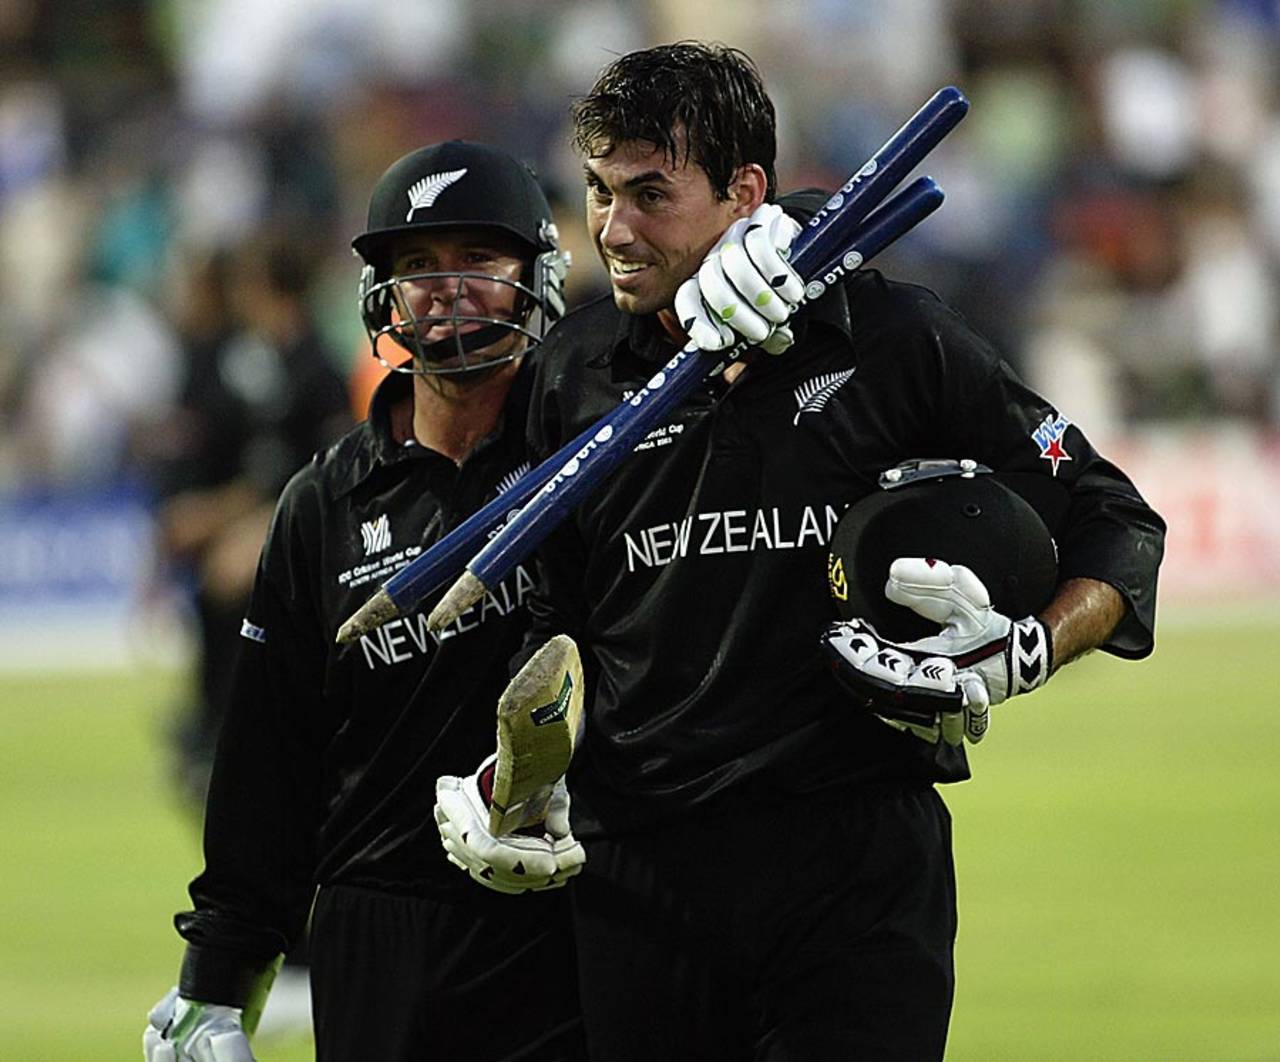 Stephen Fleming and Nathan Astle troop off after a remarkable victory, South Africa v New Zealand, 15th match, World Cup, Johannesburg, February 16, 2003